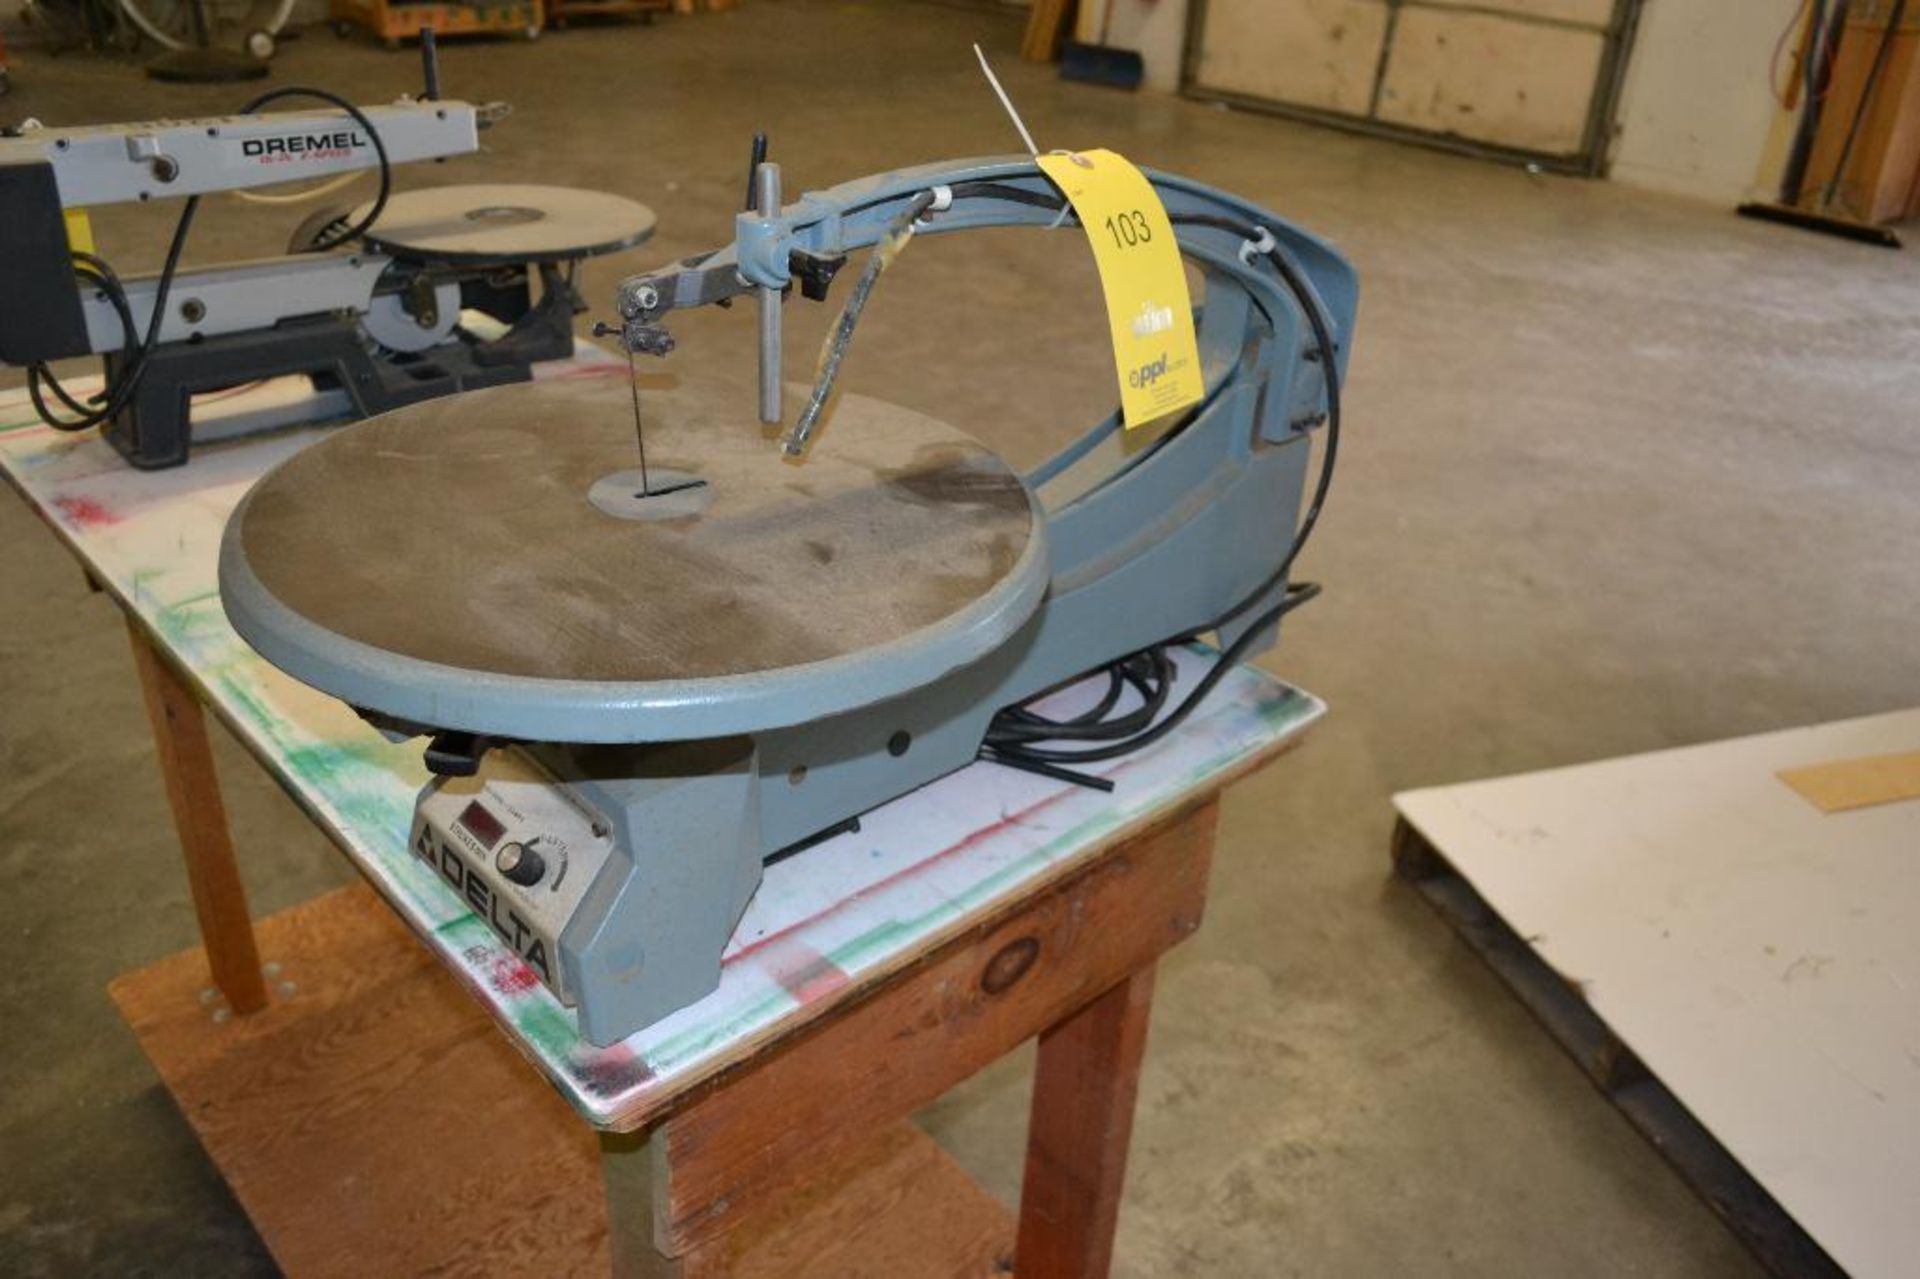 Delta 18 in. Jig Saw Model 40-601, S/N 94D39041, 16 in. Dia. Work Table